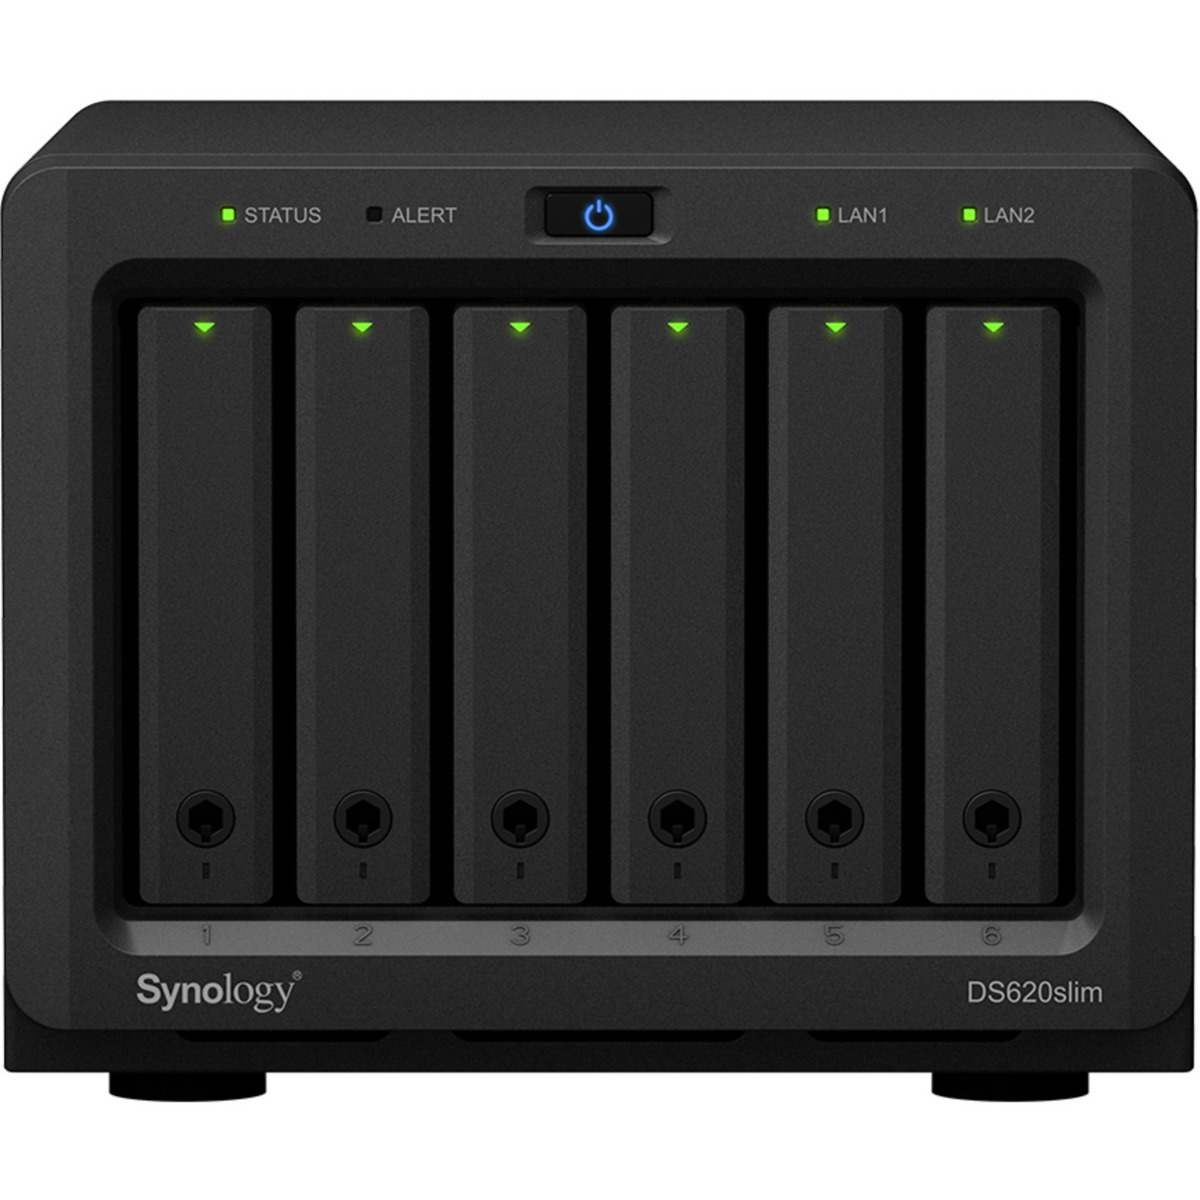 buy $5887 Synology DiskStation DS620slim 48tb Desktop NAS - Network Attached Storage Device 6x8000gb Samsung 870 QVO MZ-77Q8T0 2.5 SATA 6Gb/s SSD CONSUMER Class Drives Installed - Burn-In Tested - FREE RAM UPGRADE - nas headquarters buy network attached storage server device das new raid-5 free shipping usa christmas new year holiday sale DiskStation DS620slim